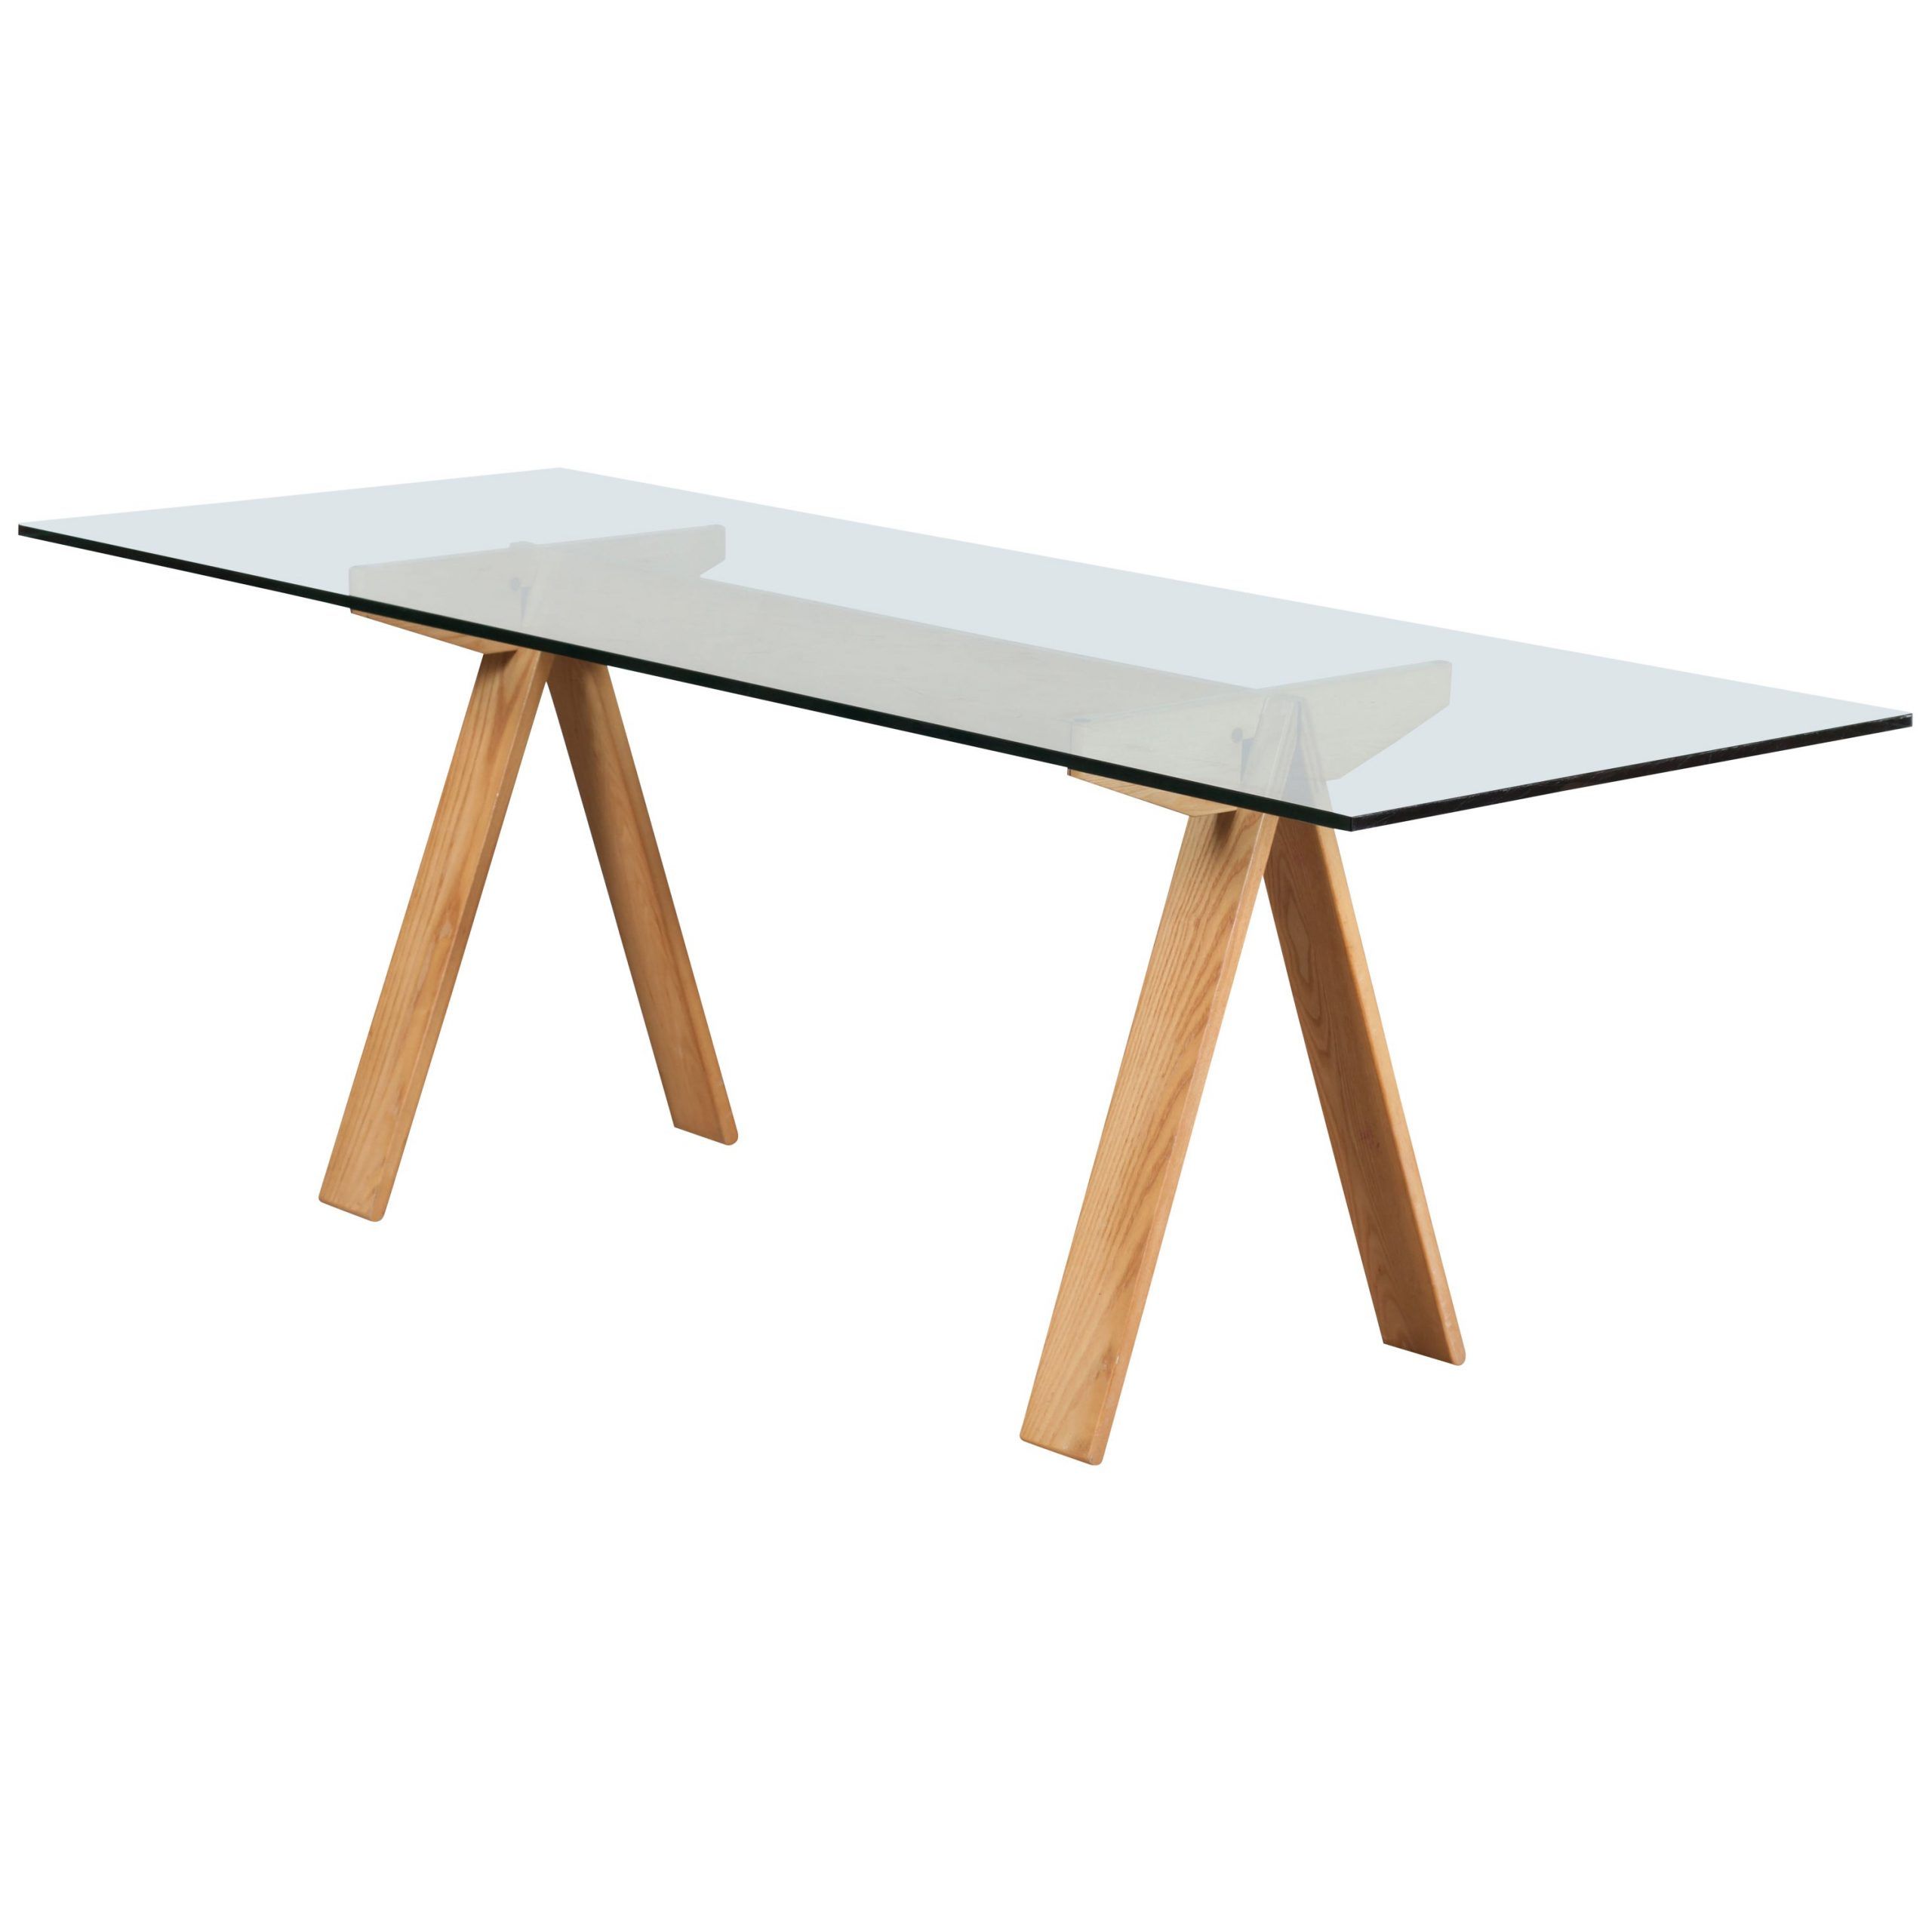 Minimalist 'martino' Dining Tablegigi Sabadin For Emme Throughout Latest Martino Dining Tables (View 22 of 25)